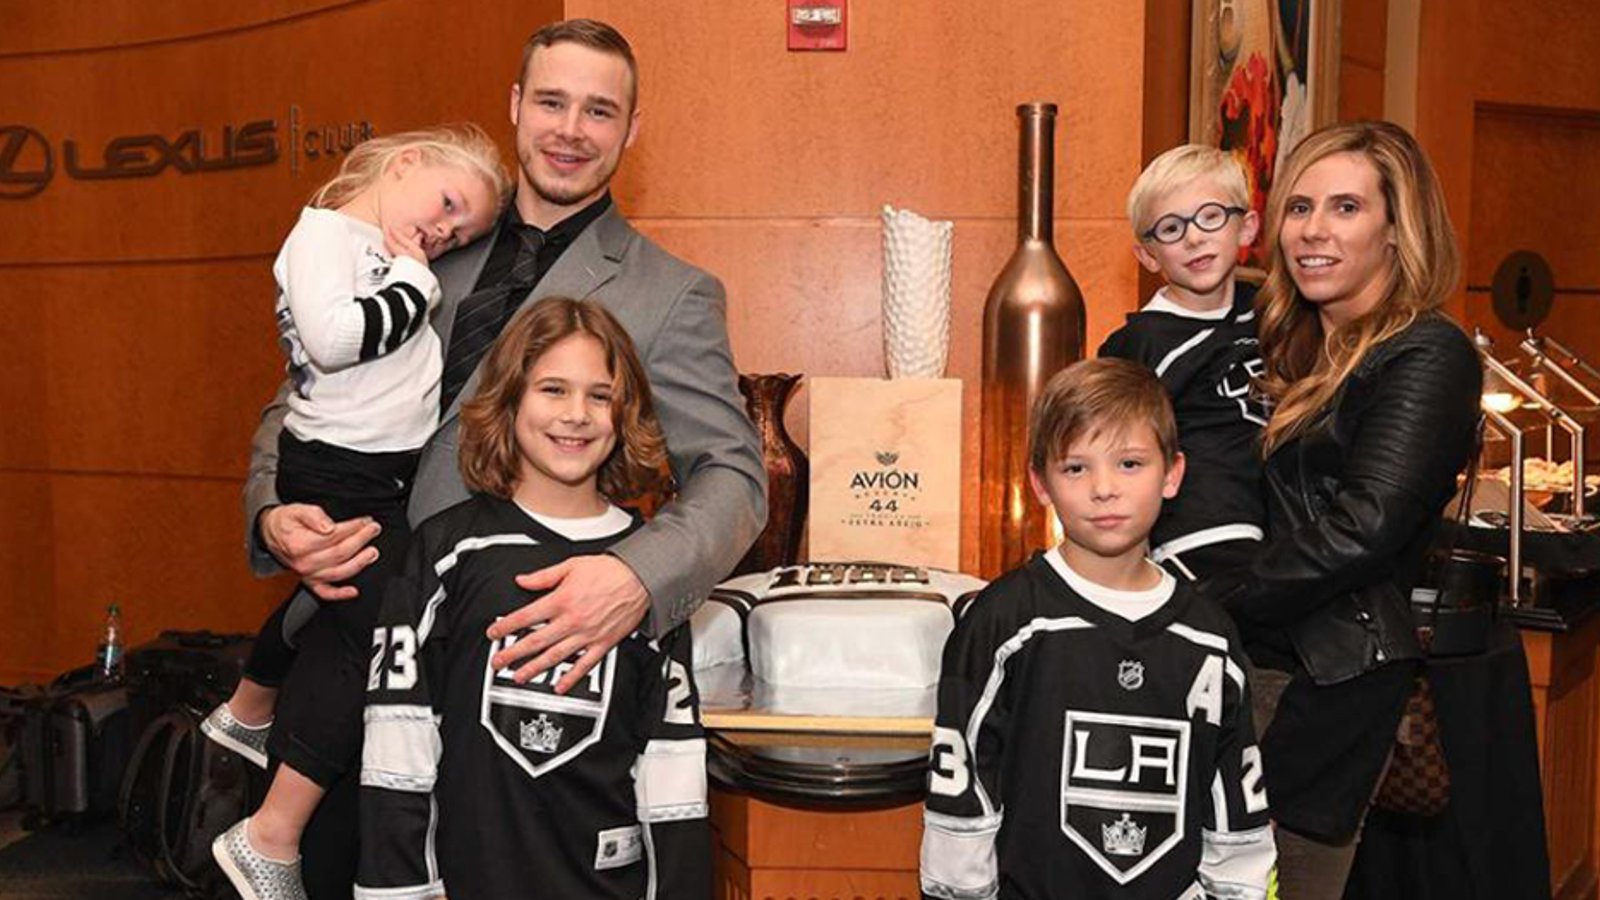 NHL Wives and Girlfriends — Nicole and Dustin Brown [Source]